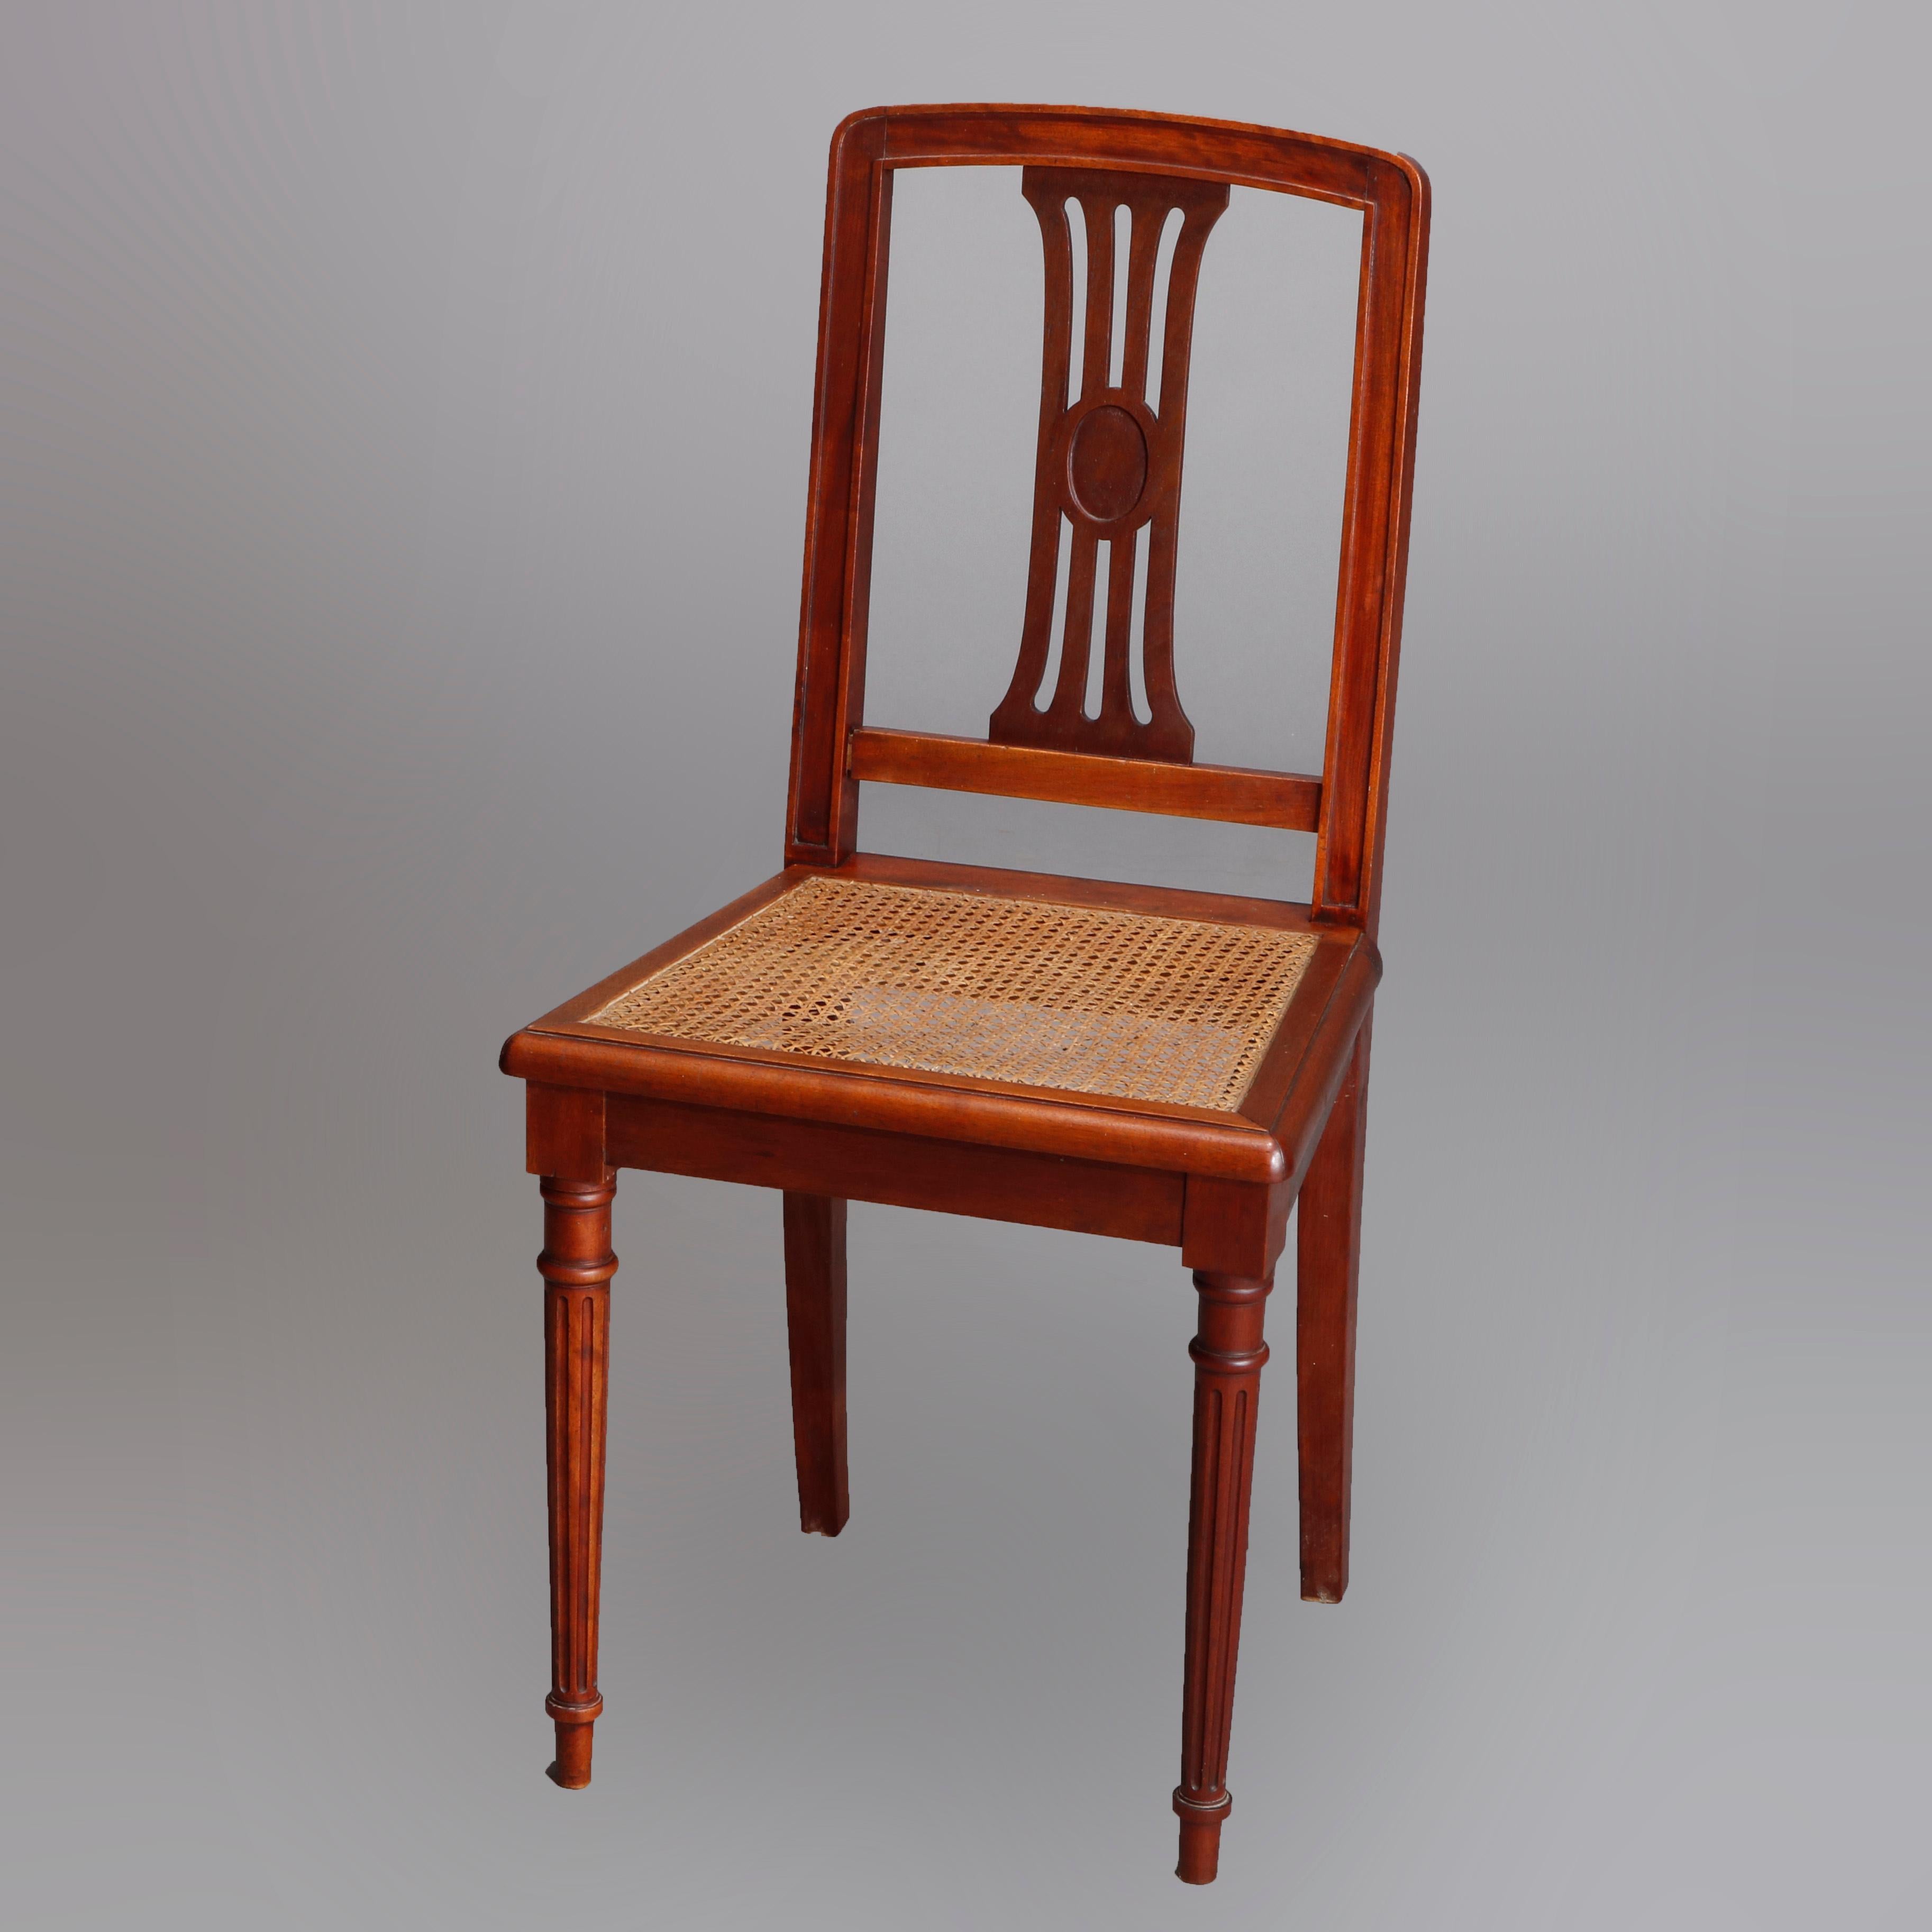 Set of six antique French Louis XVI dining chairs with mahogany frame having slat back over cane seat and raised on reeded tapered legs and feet, early 20th century

Measures: 36.25